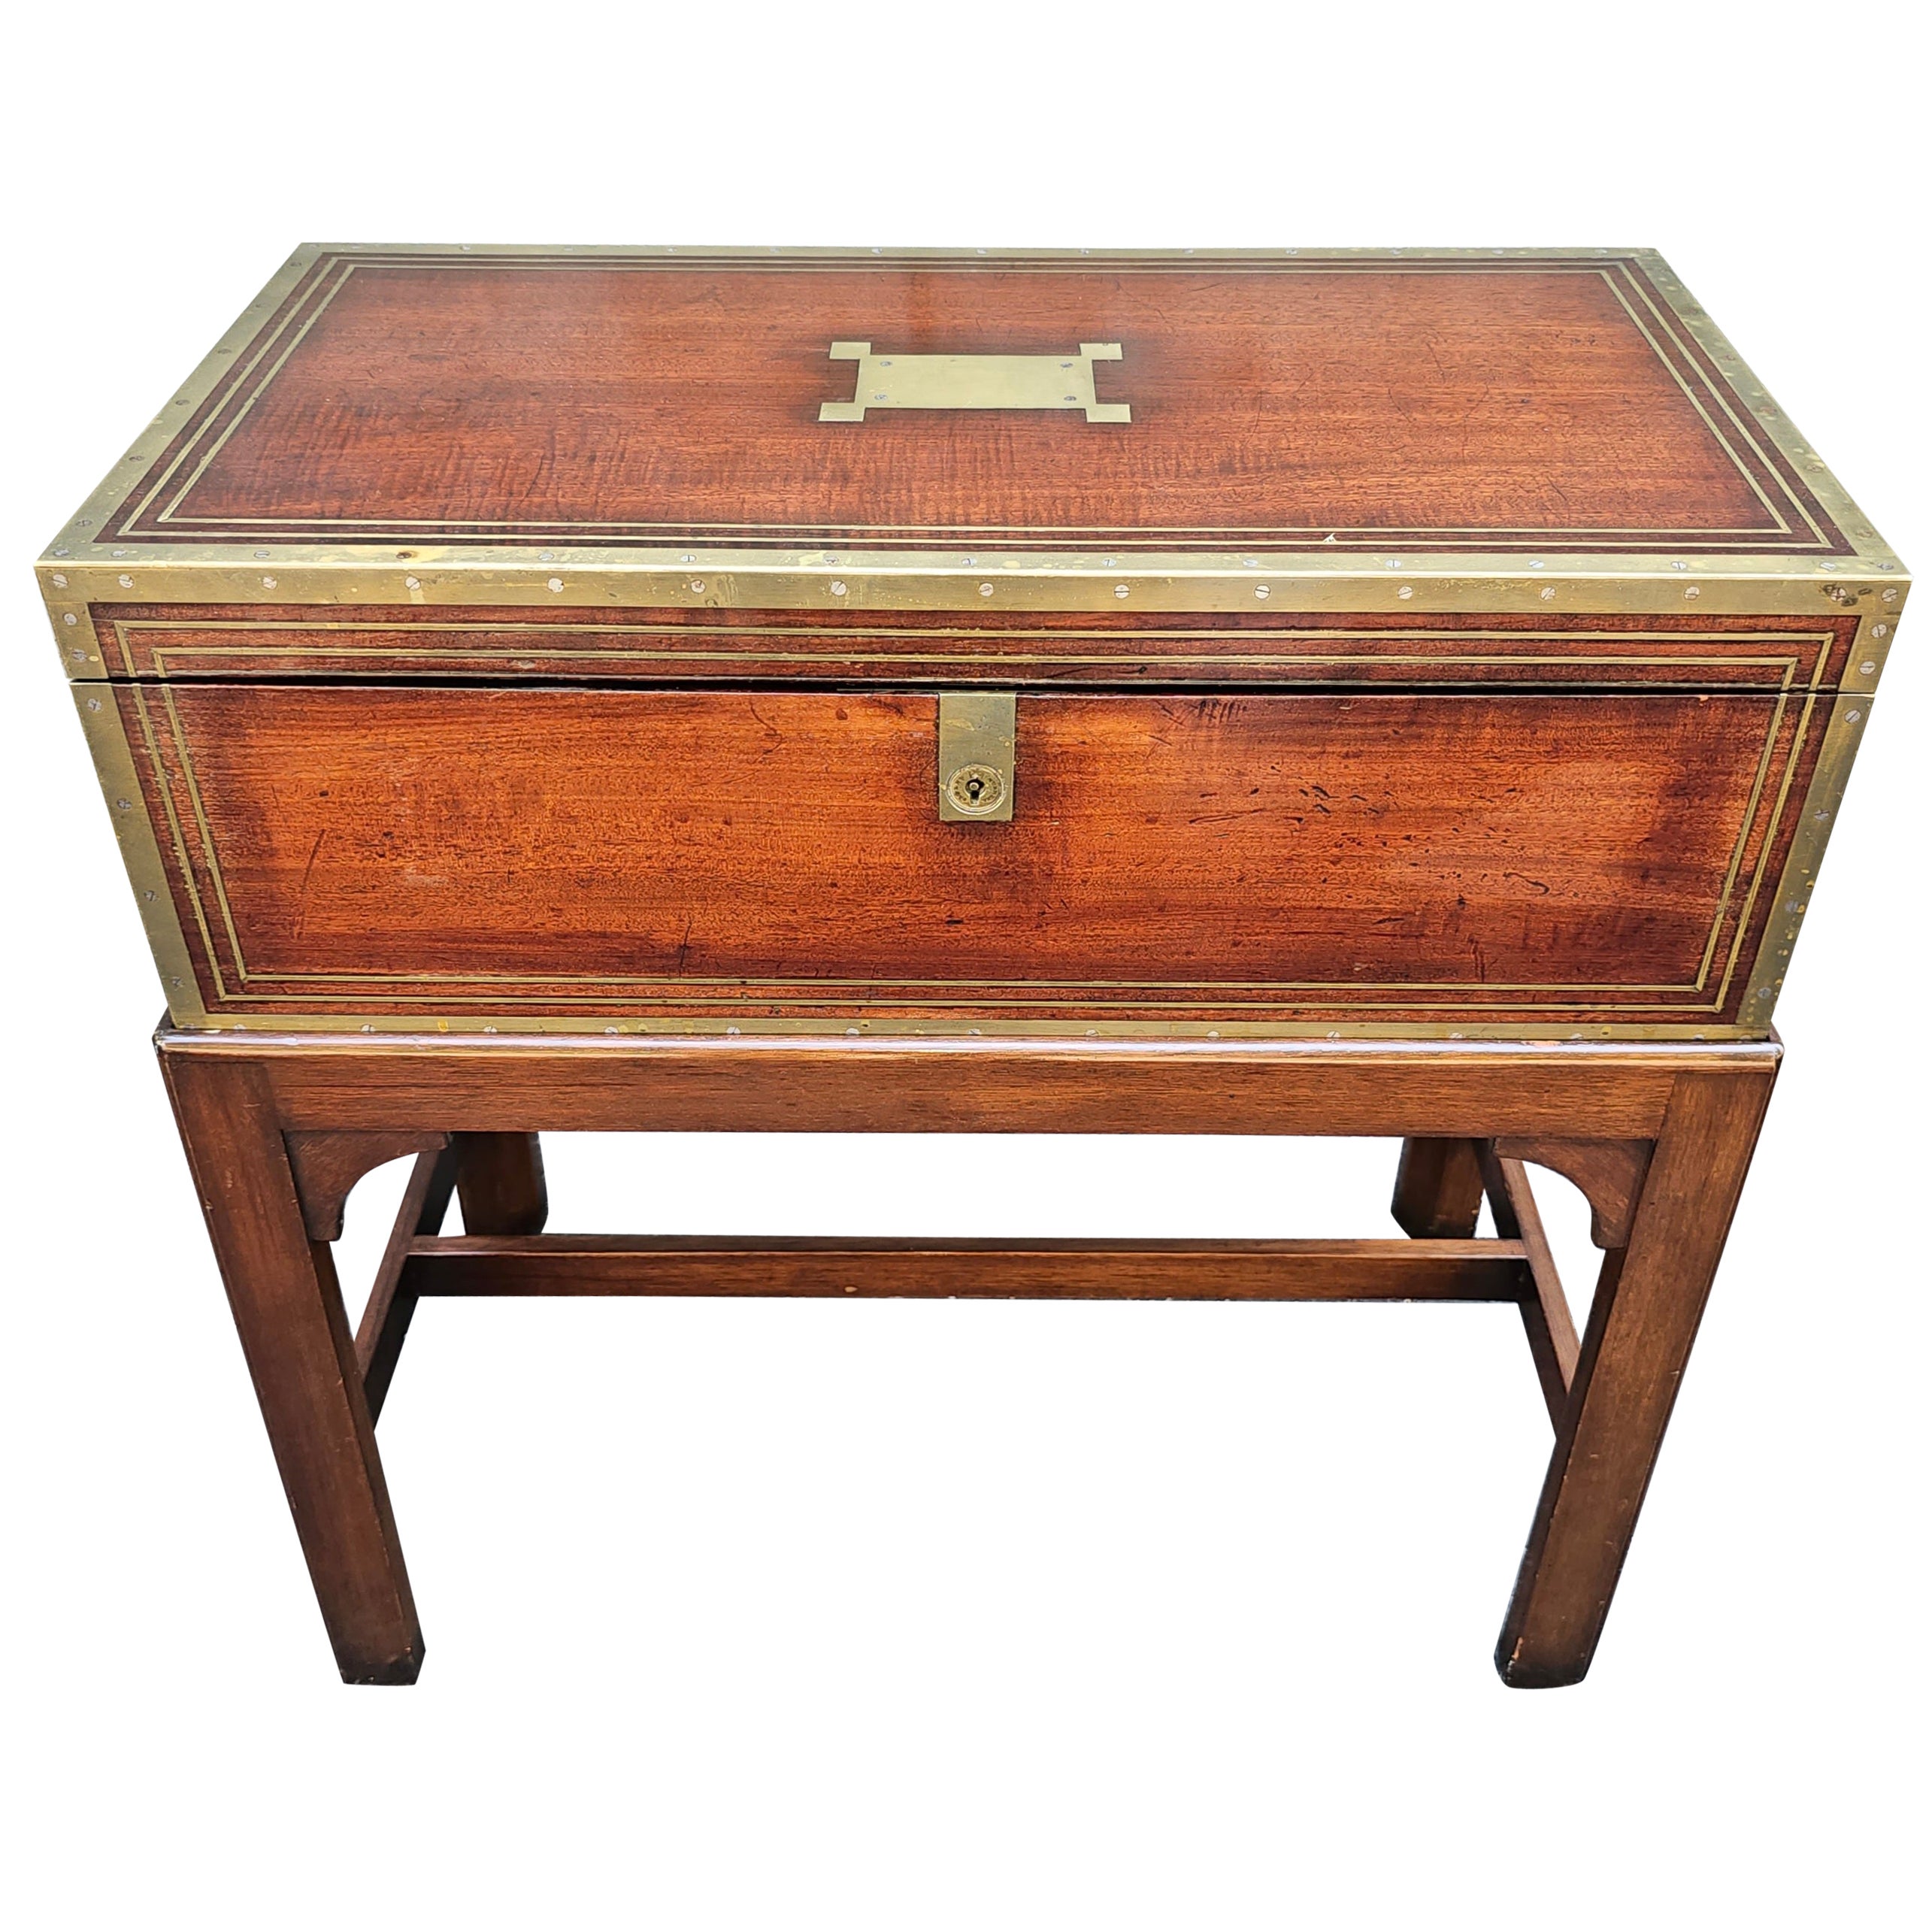 19th Century Mahogany and Brass Inlays Travel Desk on Stand